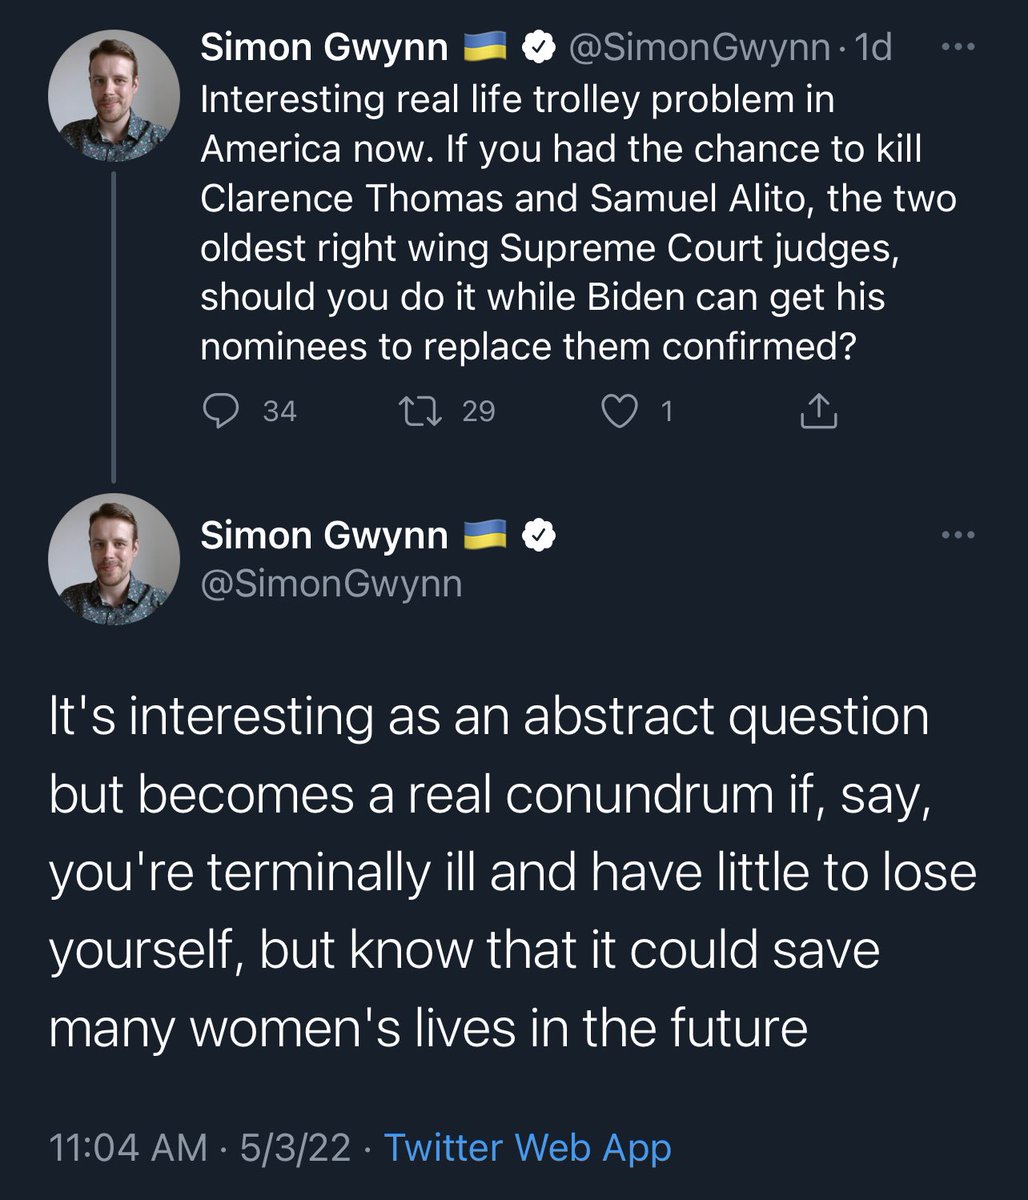 Why did you just delete these tweets? @SimonGwynn - @FBI This person should be arrested today!